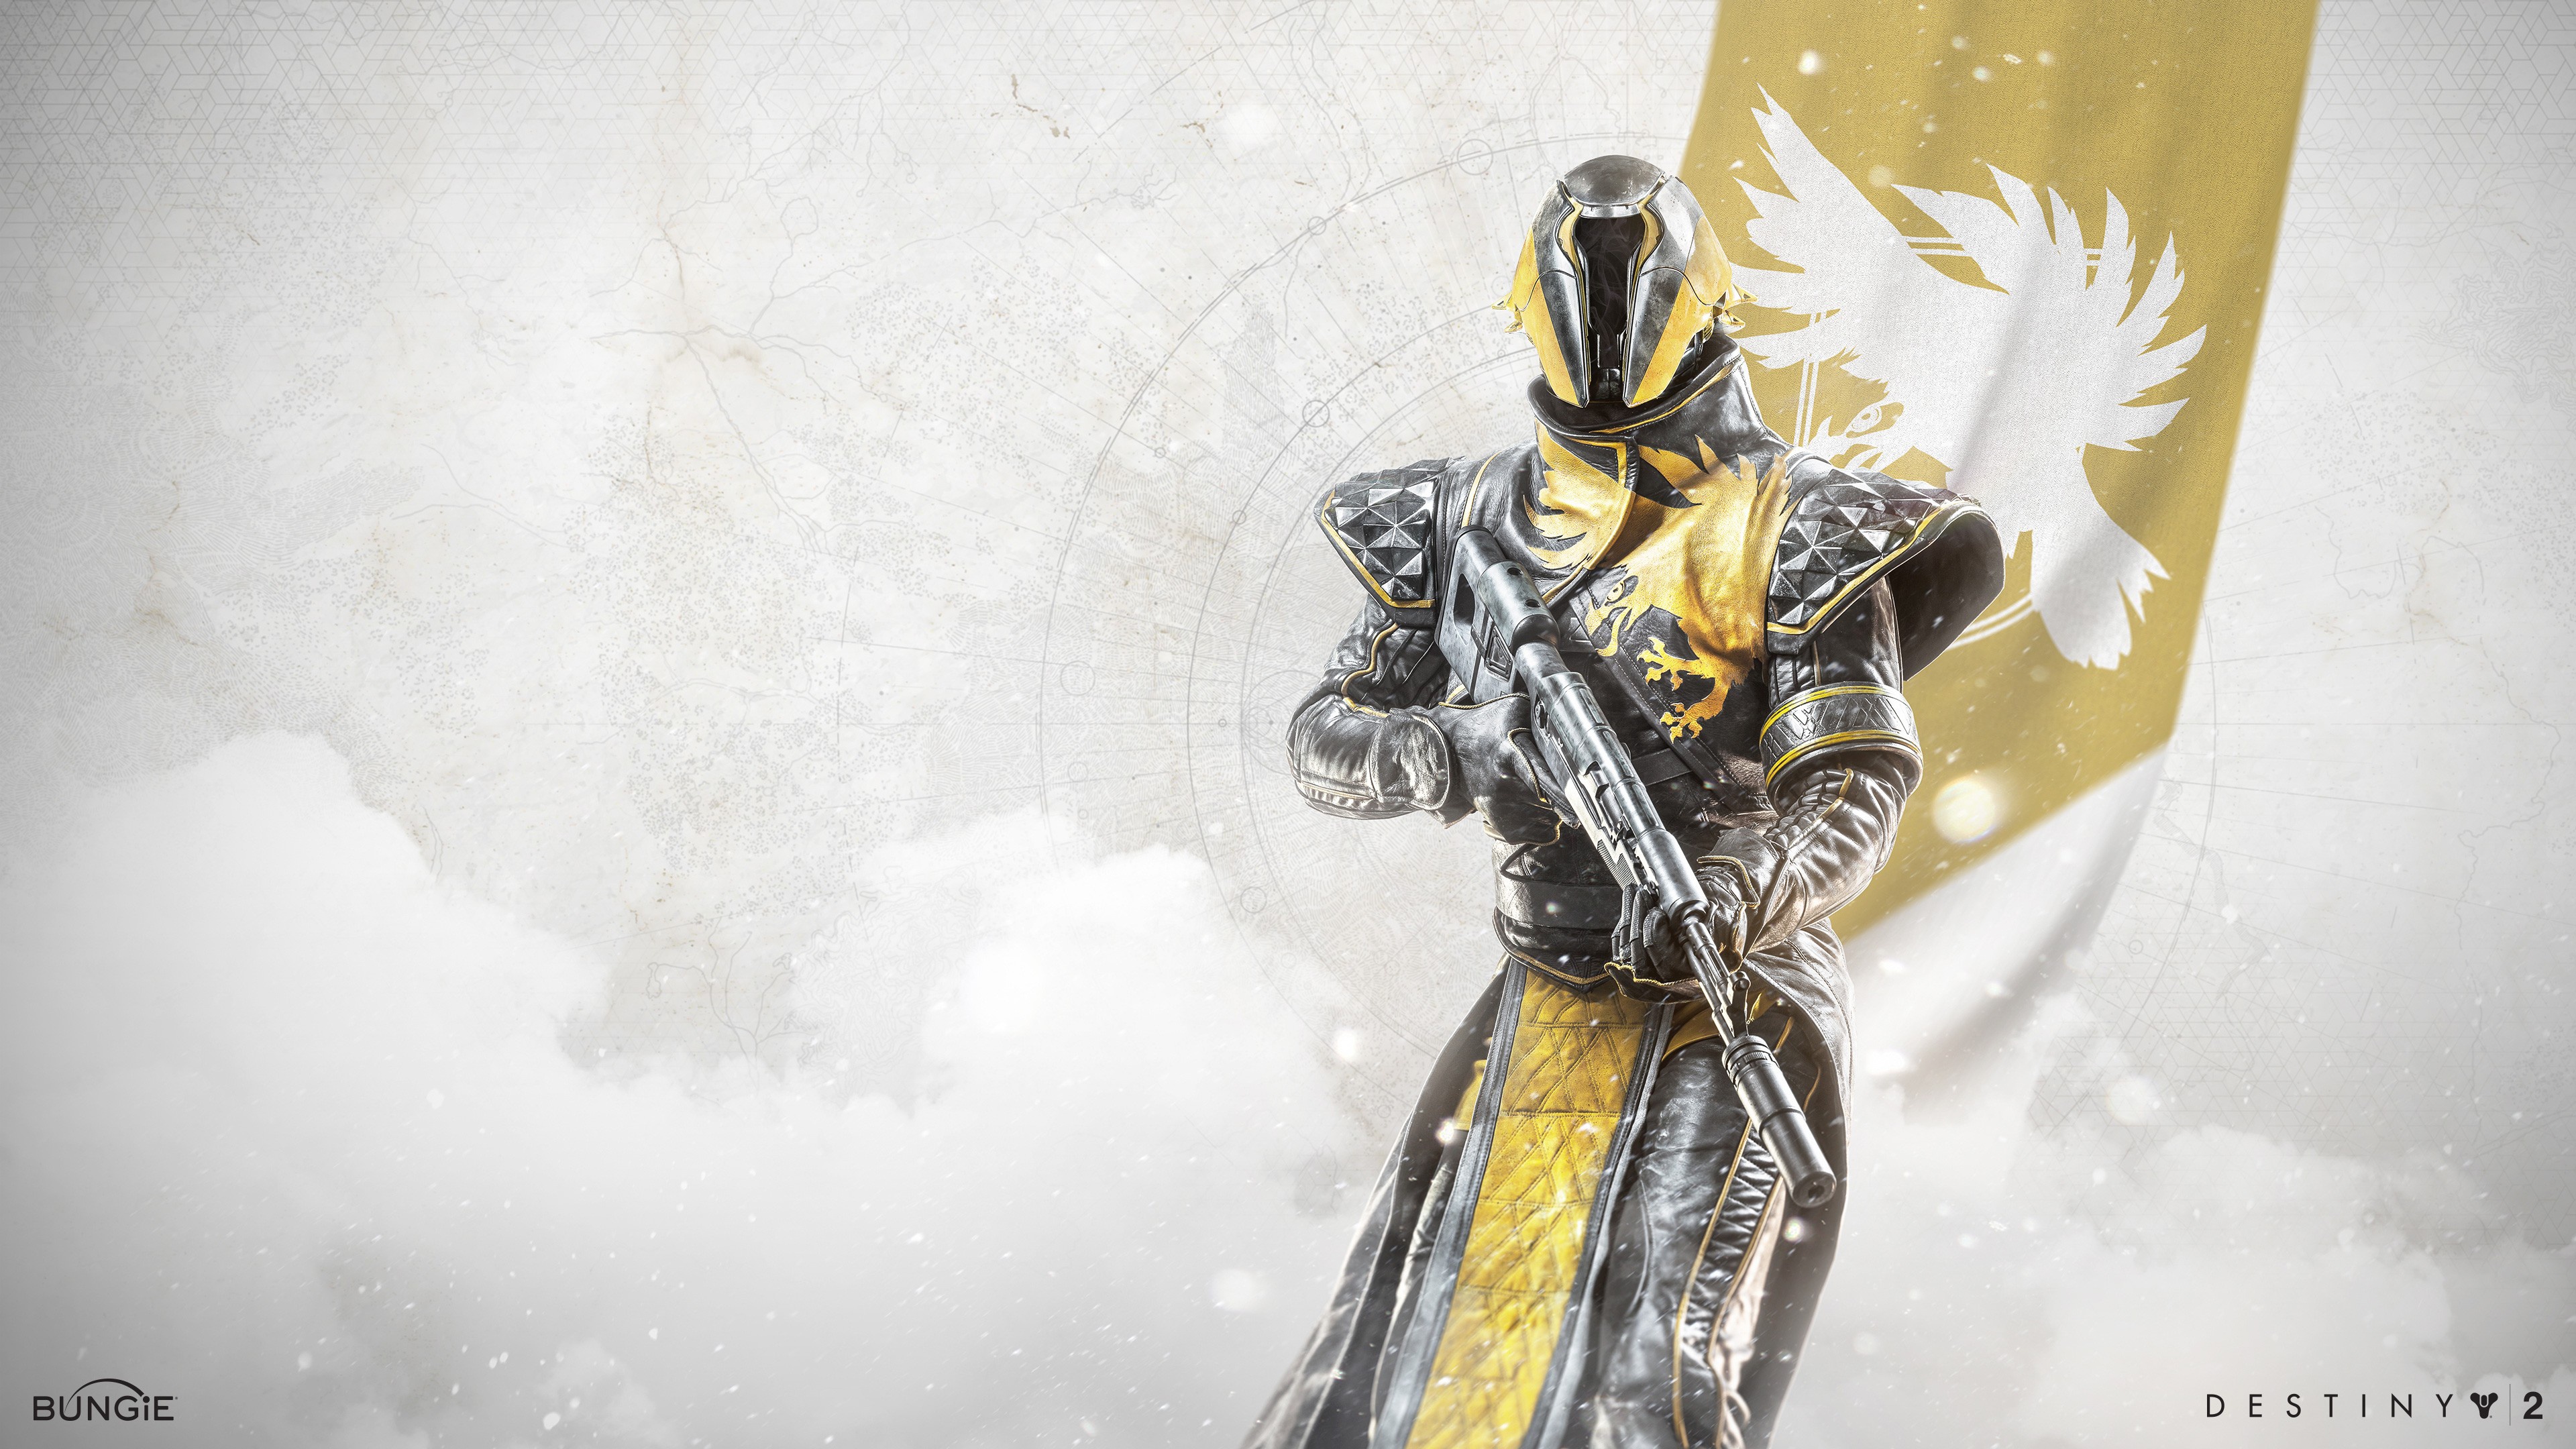 General 3840x2160 Destiny 2 video games science fiction weapon warlock (destiny) soldier Bungie video game characters